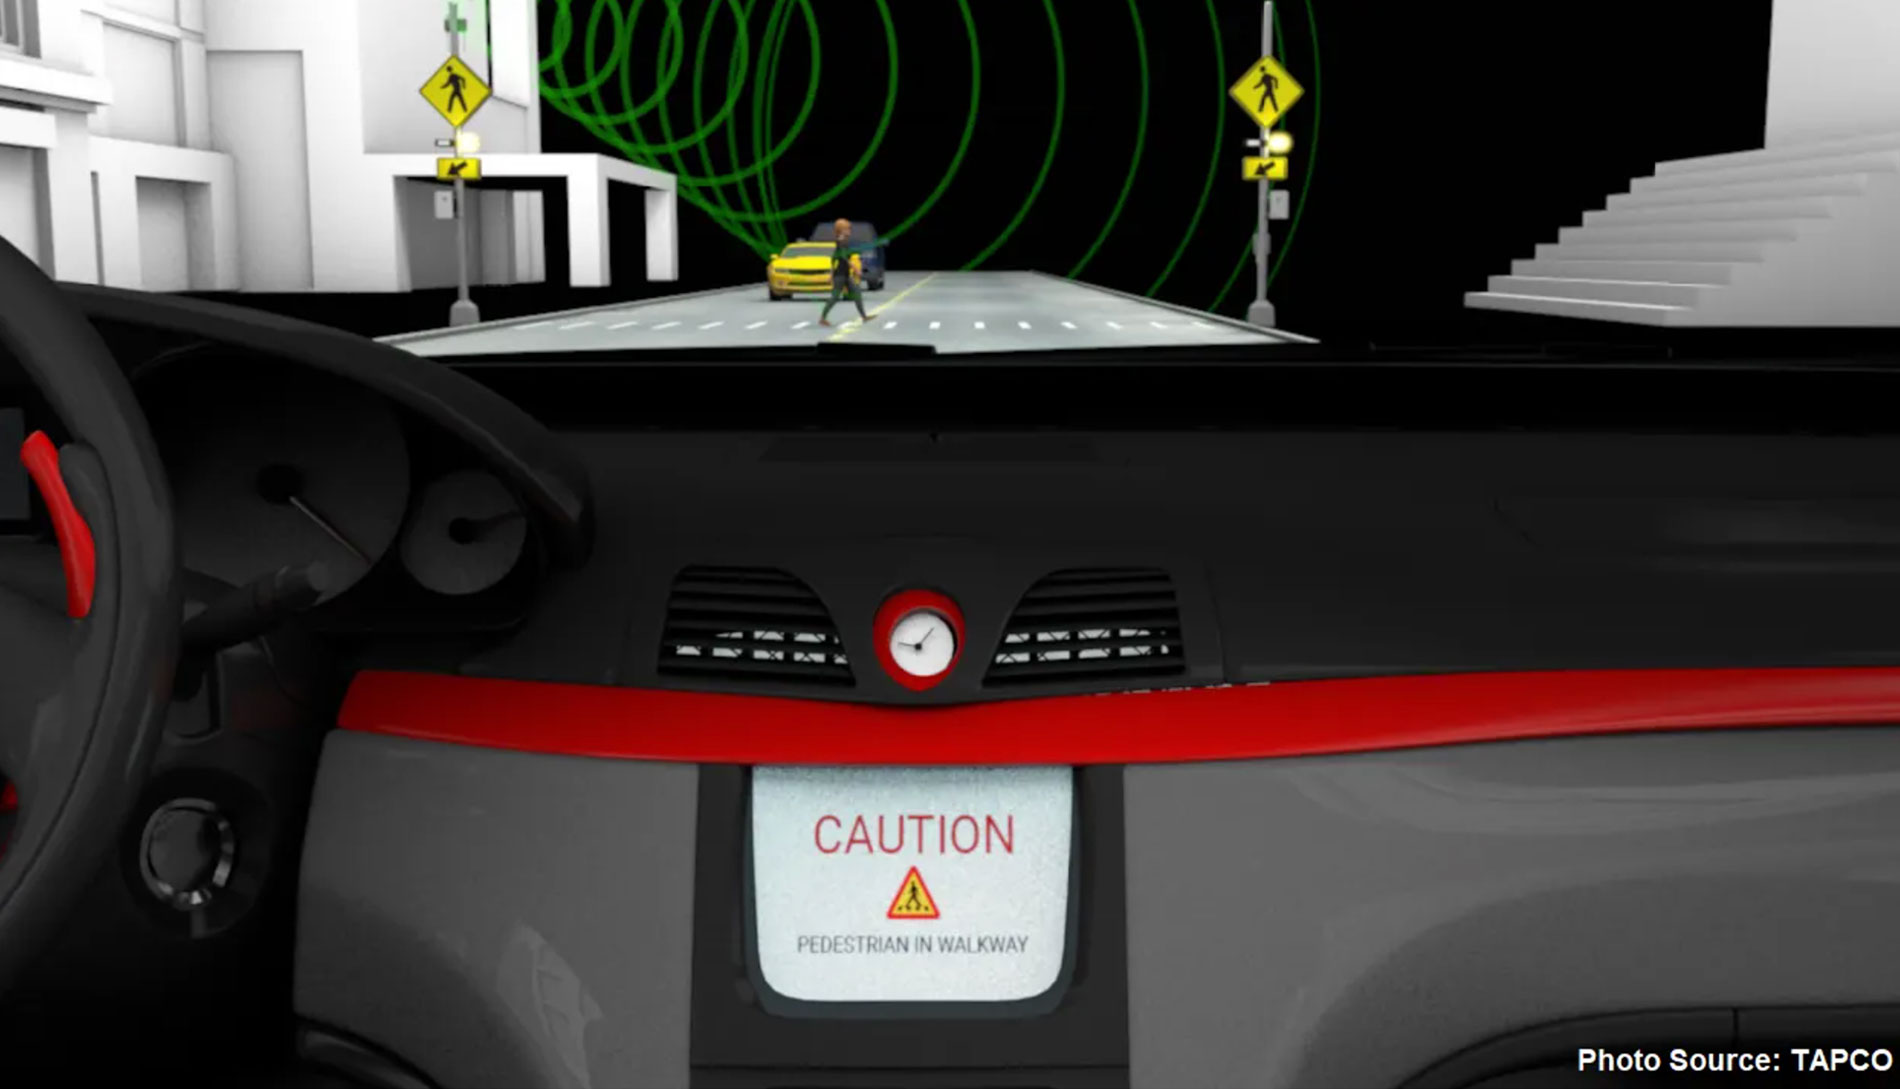 connected vehicle interface background